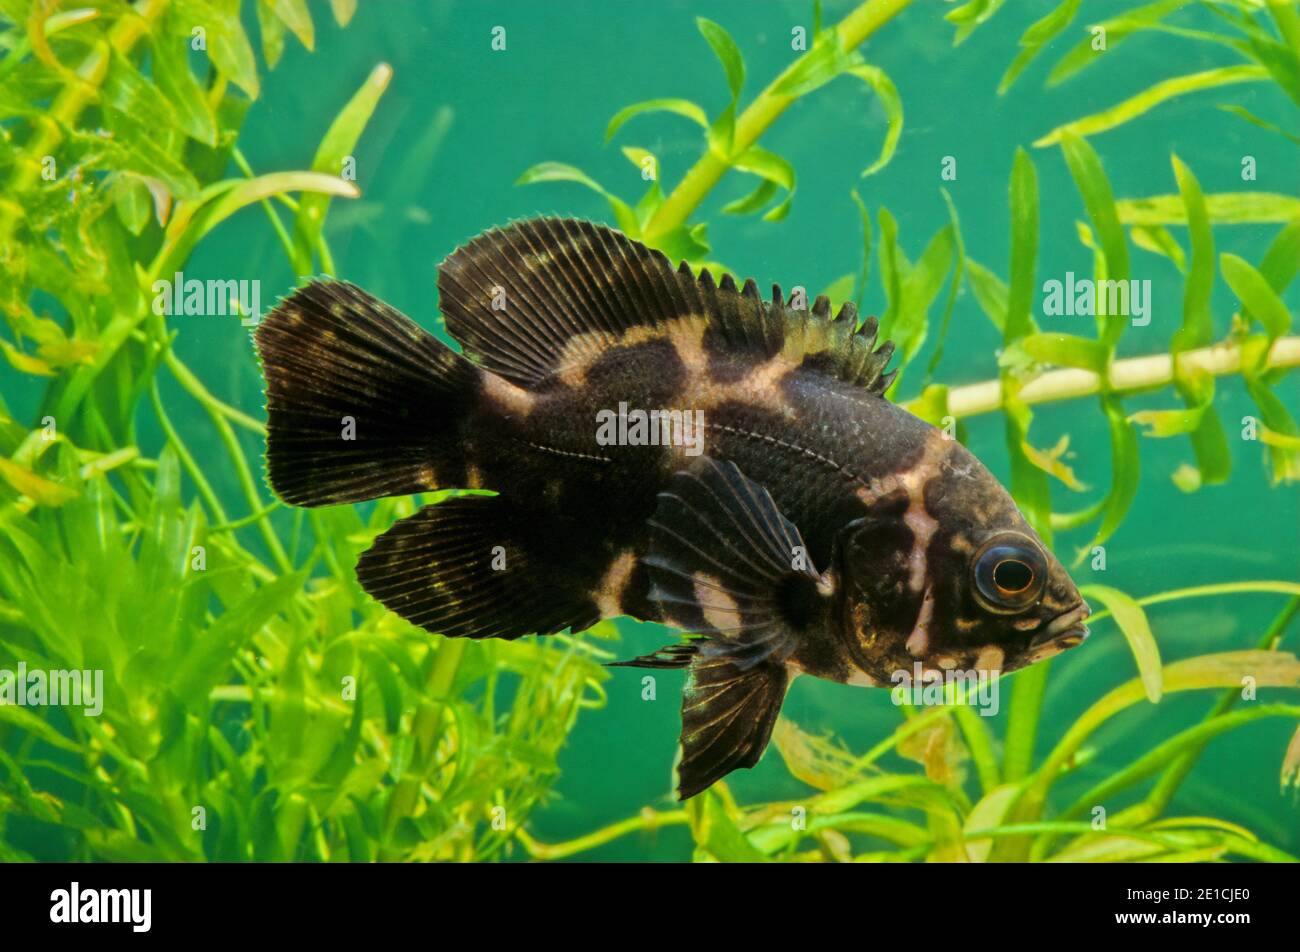 The oscar (Astronotus ocellatus) is a species of fish from the cichlid family known under a variety of common names, including tiger oscar, velvet cic Stock Photo